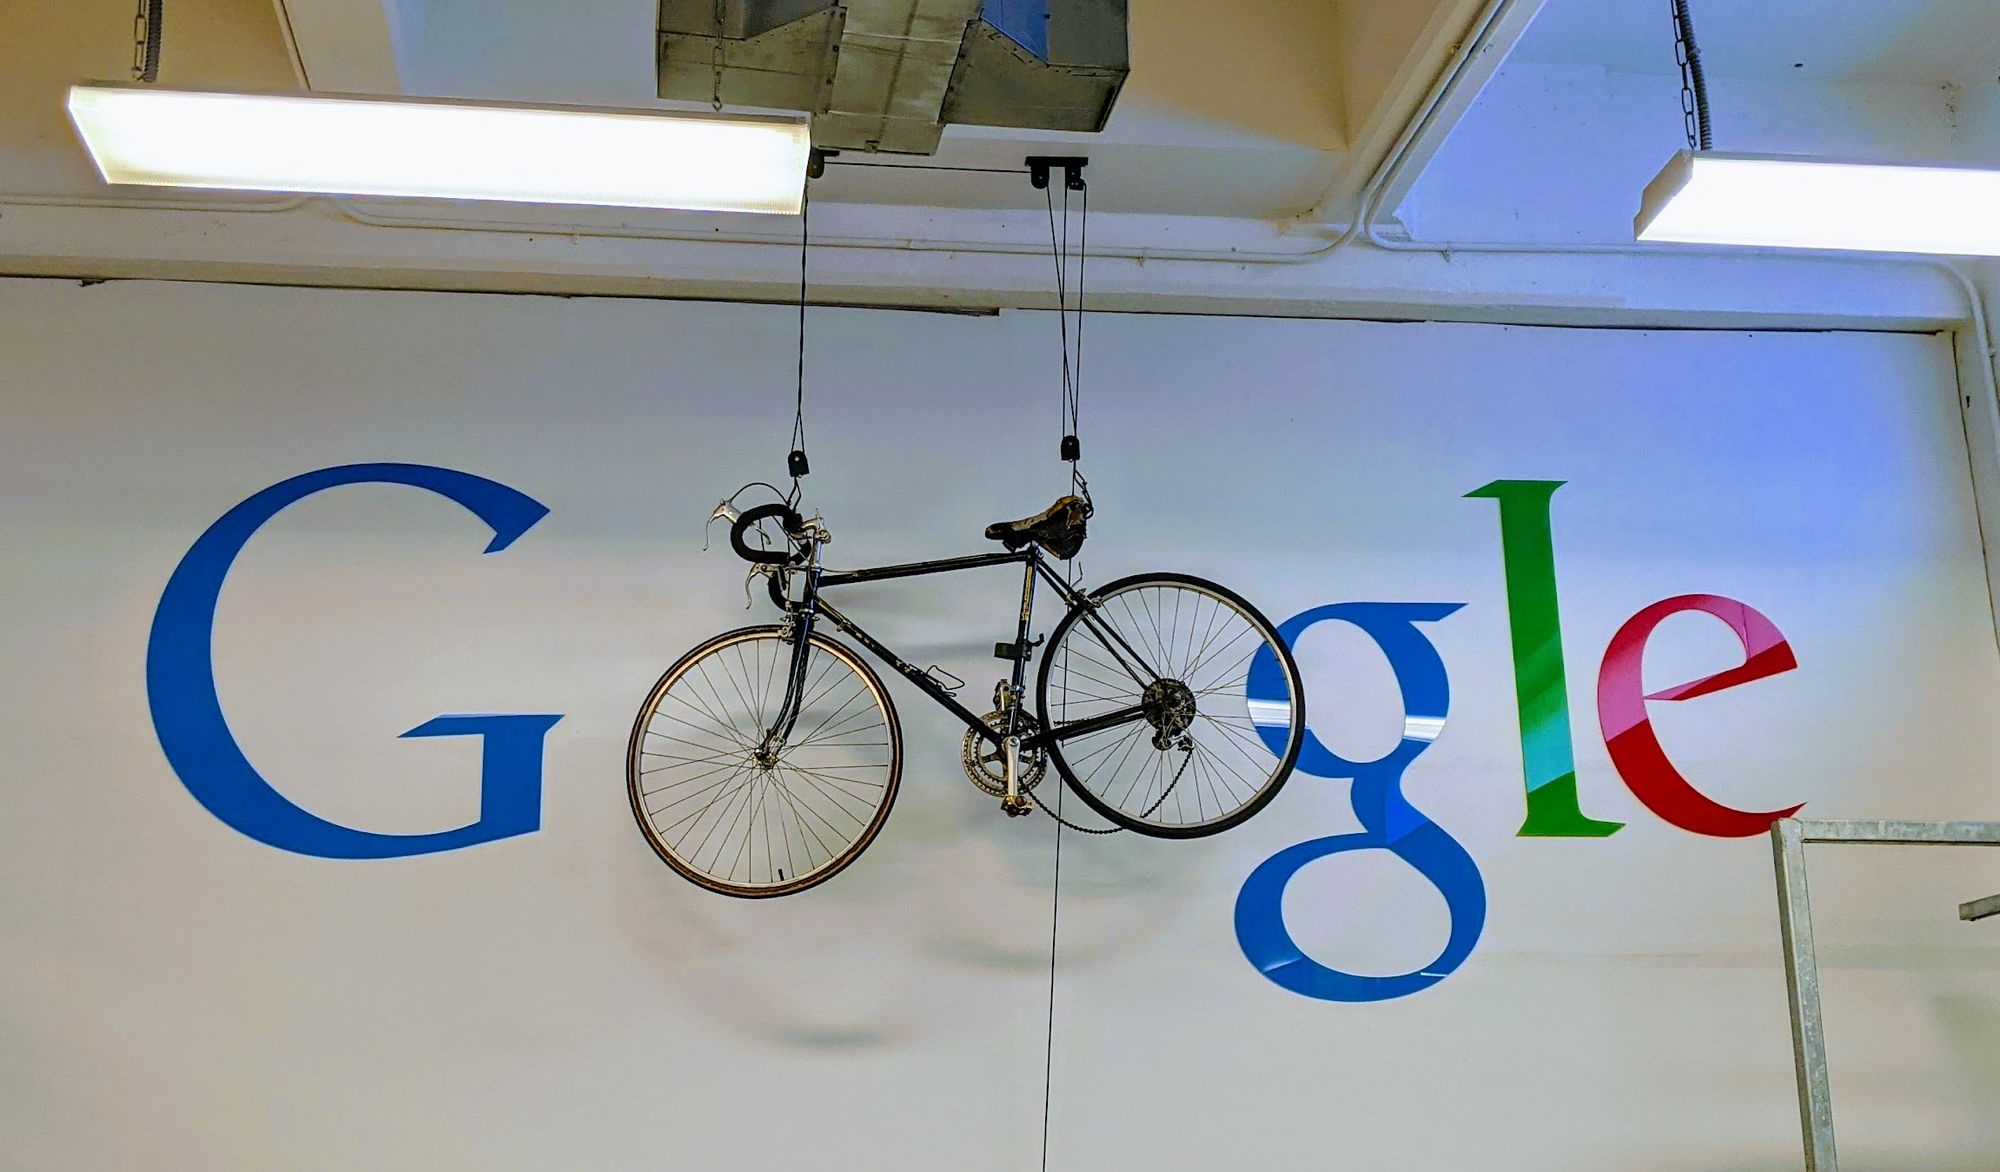 "Returning to Office" at Google NYC